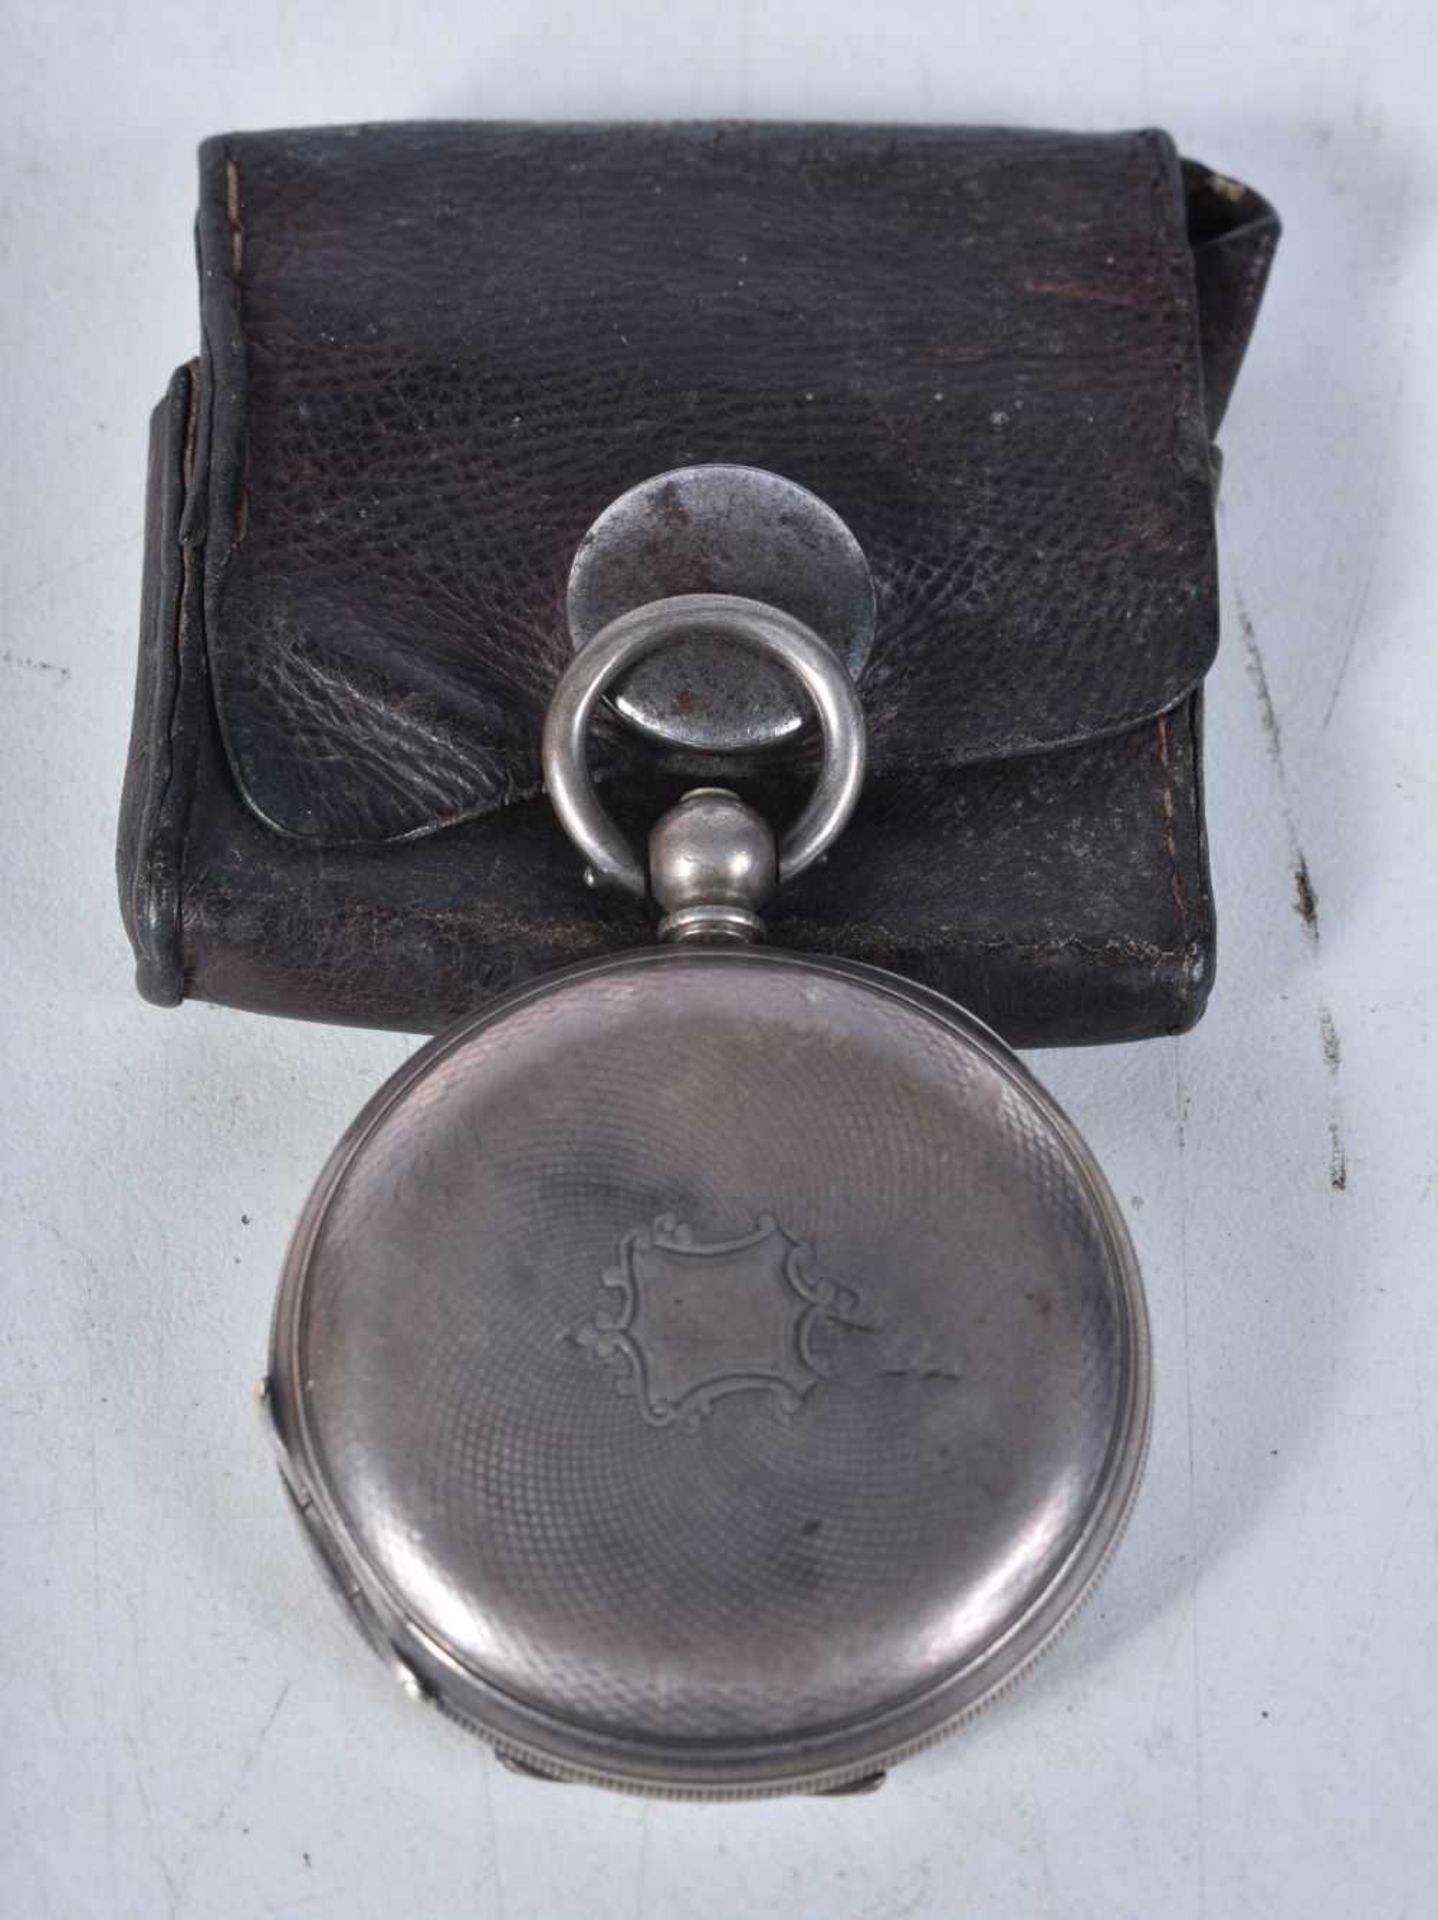 A Miniature Silver Half Hunter Pocket Watch with Black Enamel Numerals on Case in a Leather Pouch. - Image 2 of 3